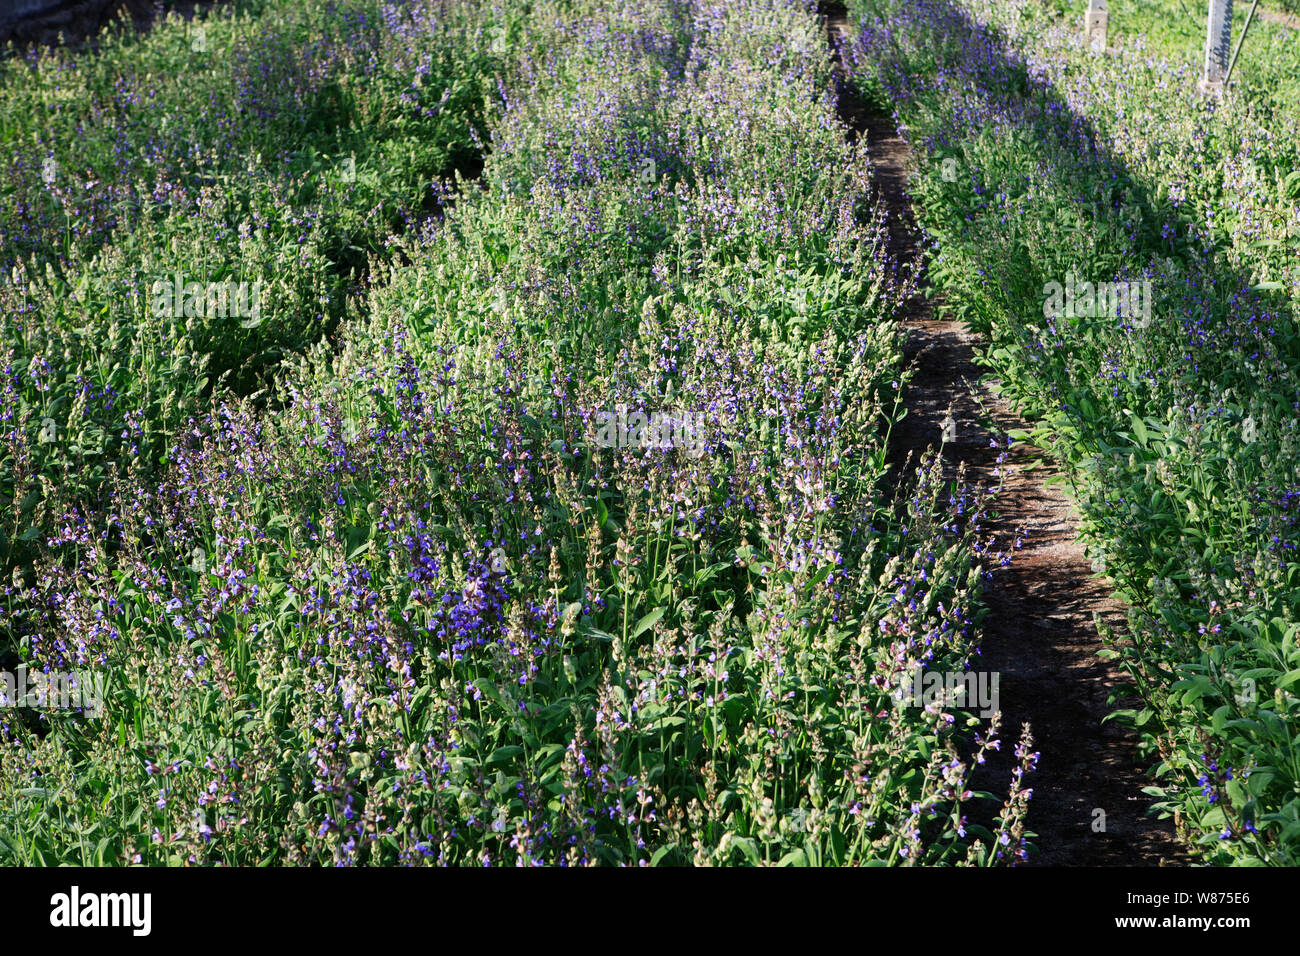 lavender plants growing in a commercial greenhouse Stock Photo